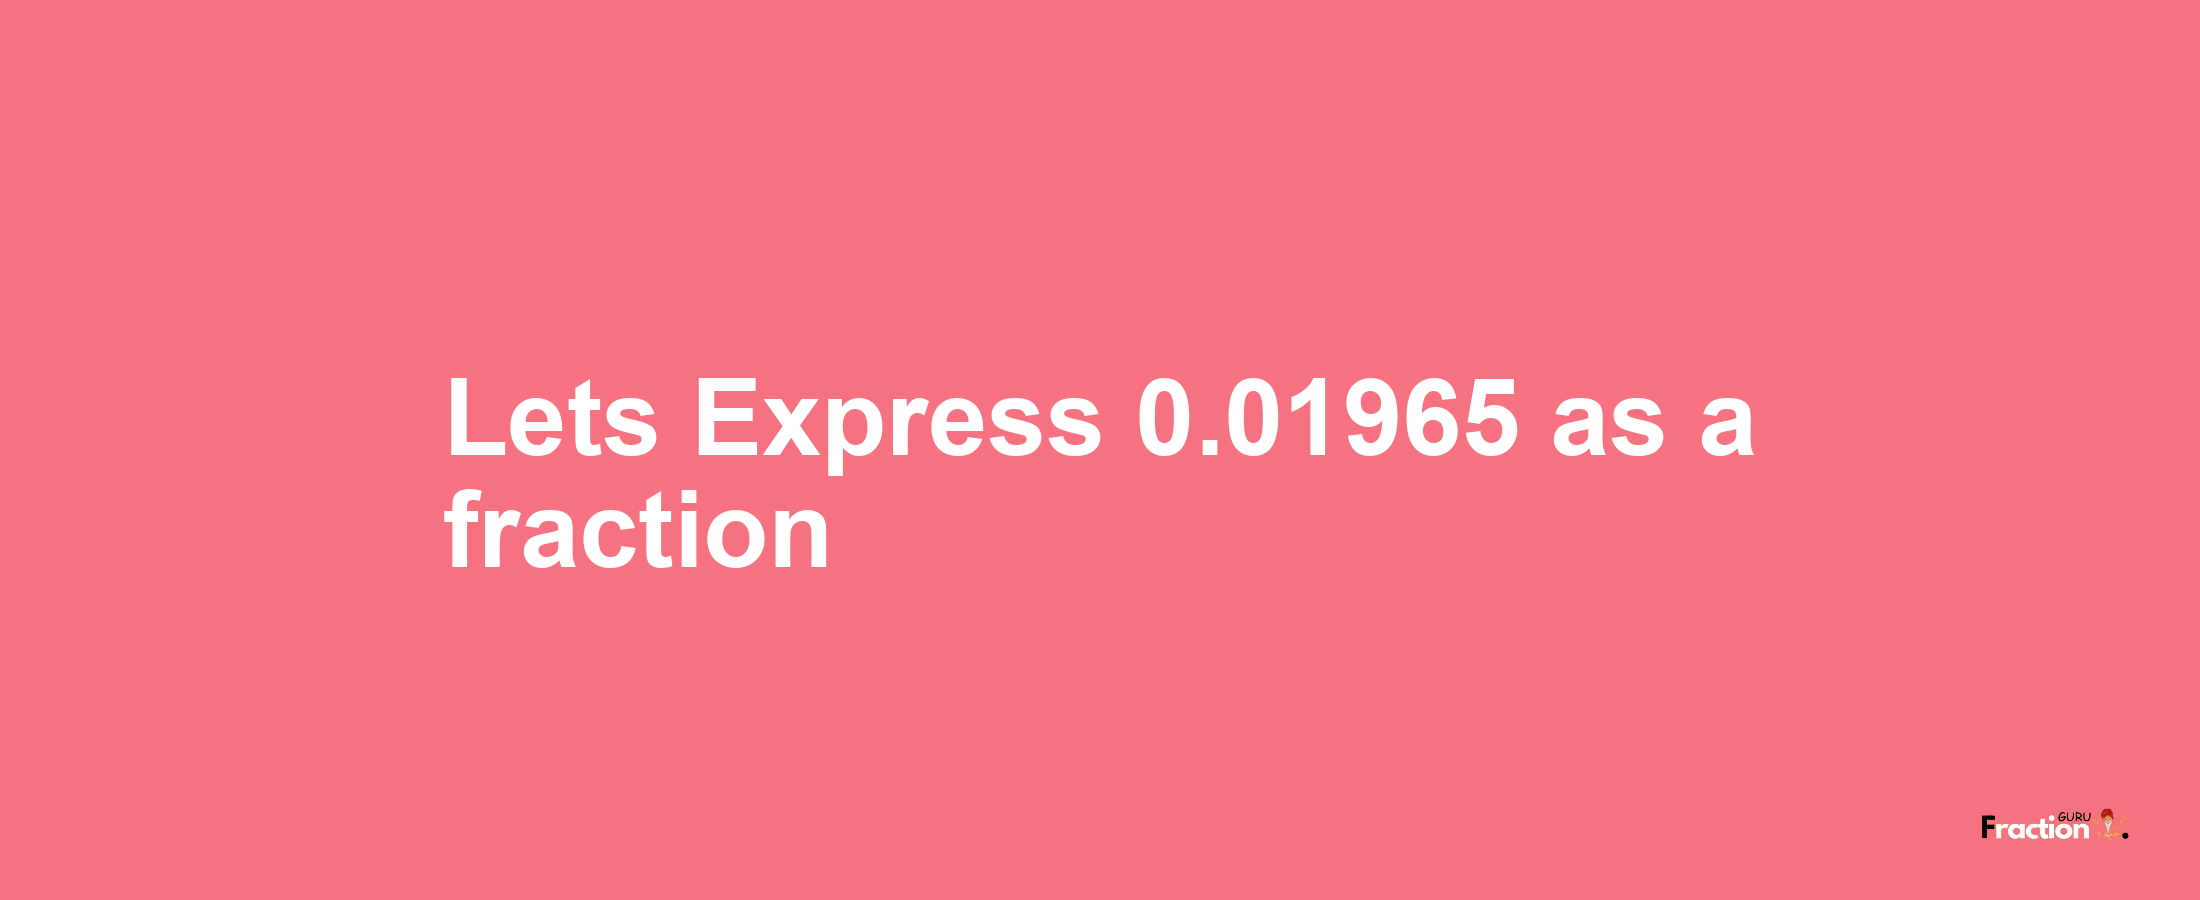 Lets Express 0.01965 as afraction